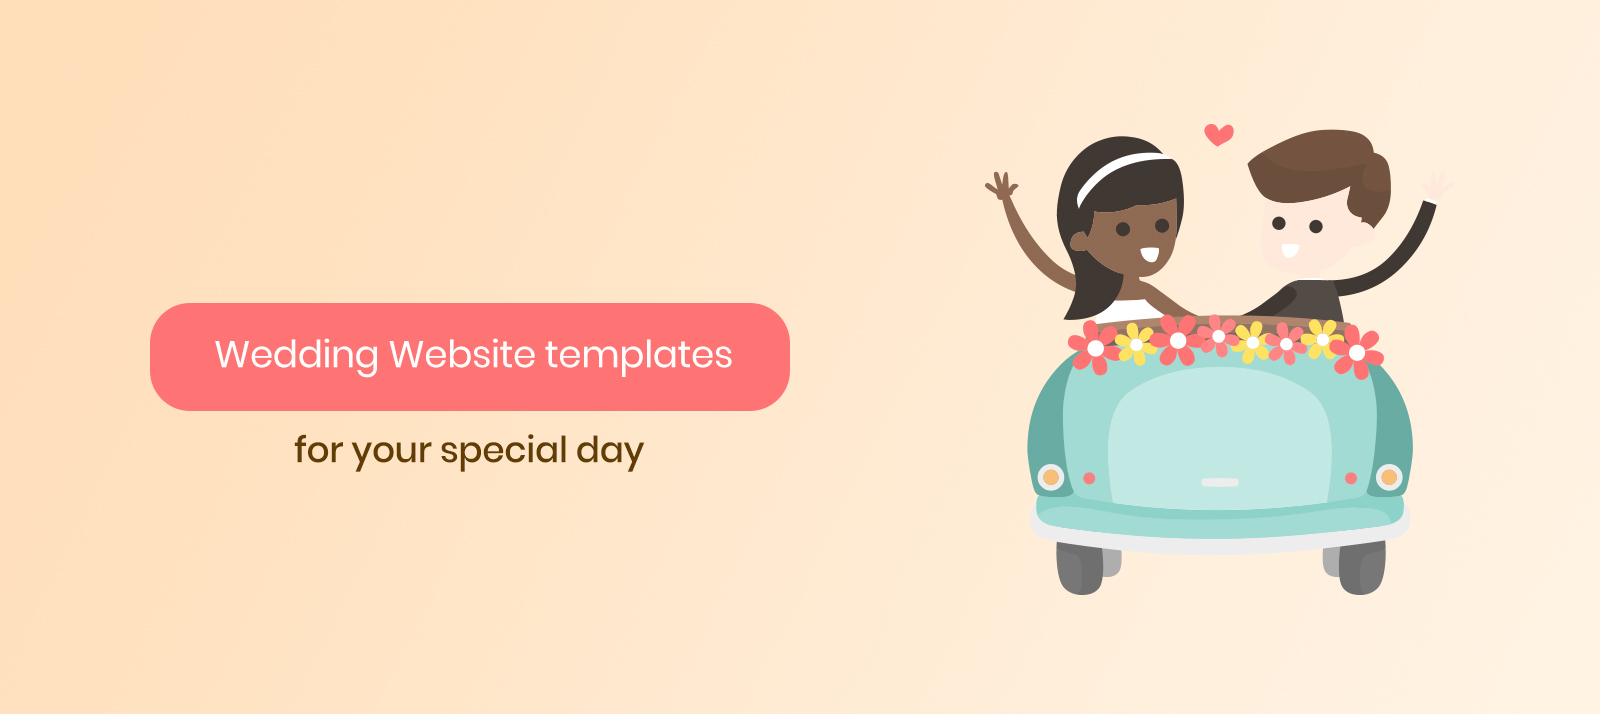  10 Best Wedding Website Templates For Your Special Day 